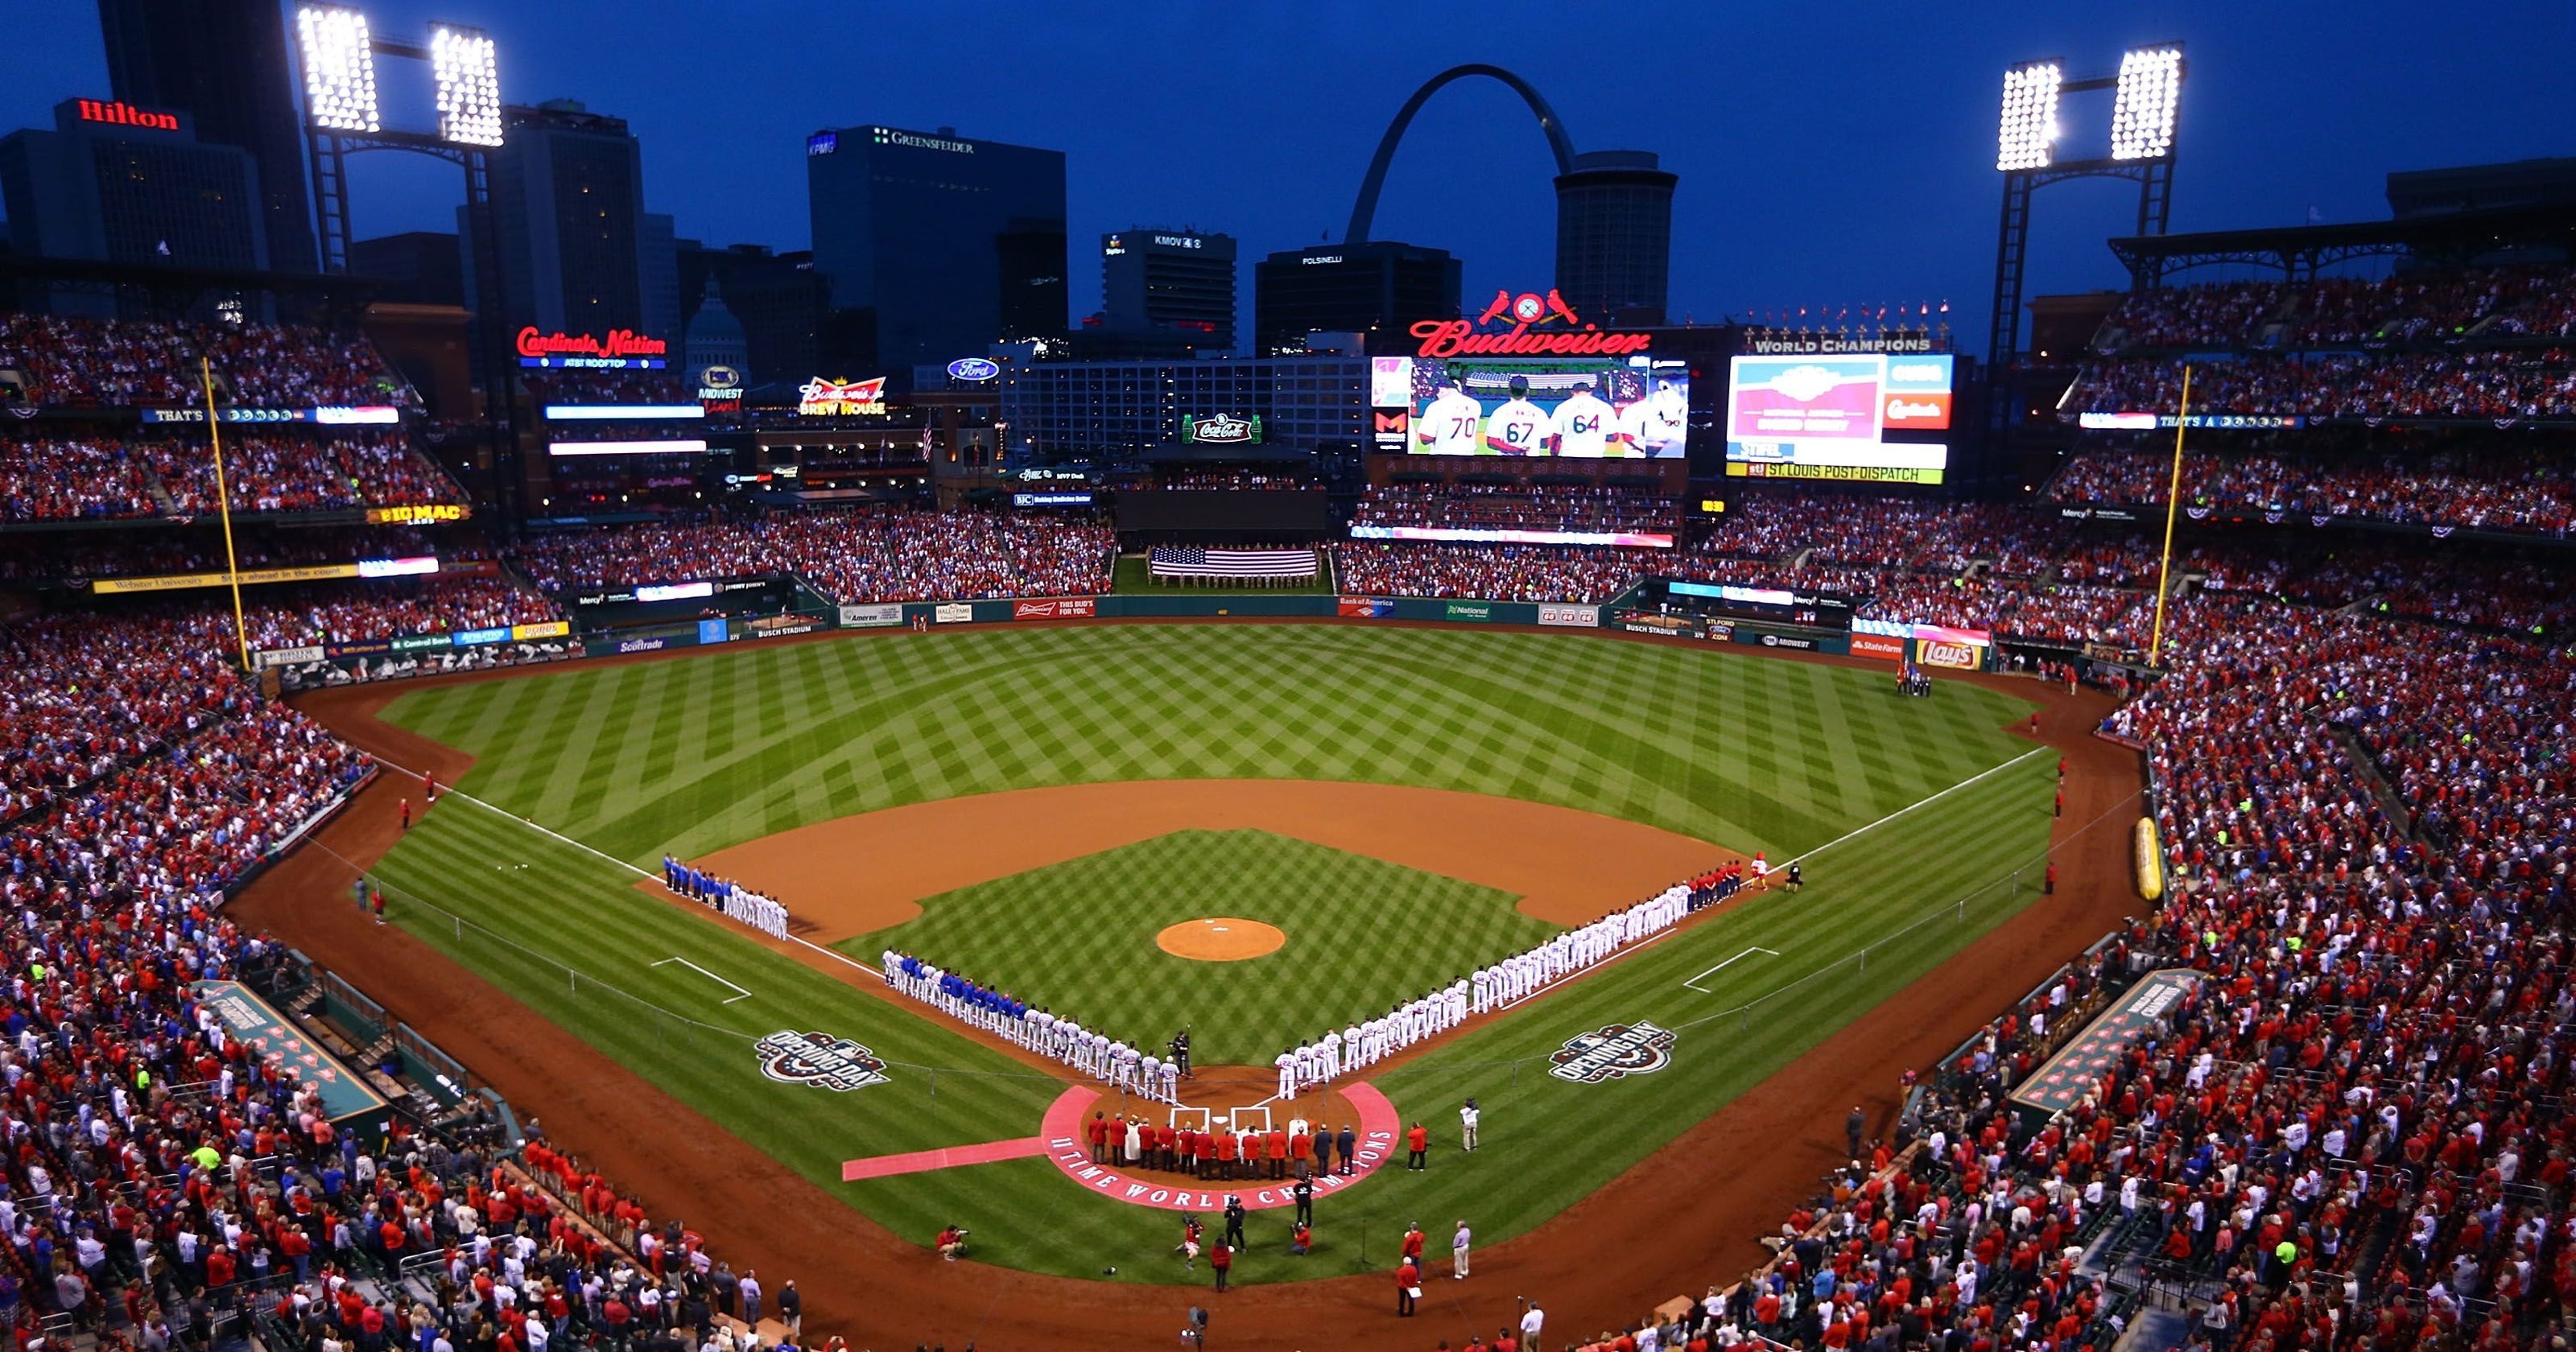 A woman was grazed by a stray bullet attending St. Louis Cardinals game at Busch Stadium